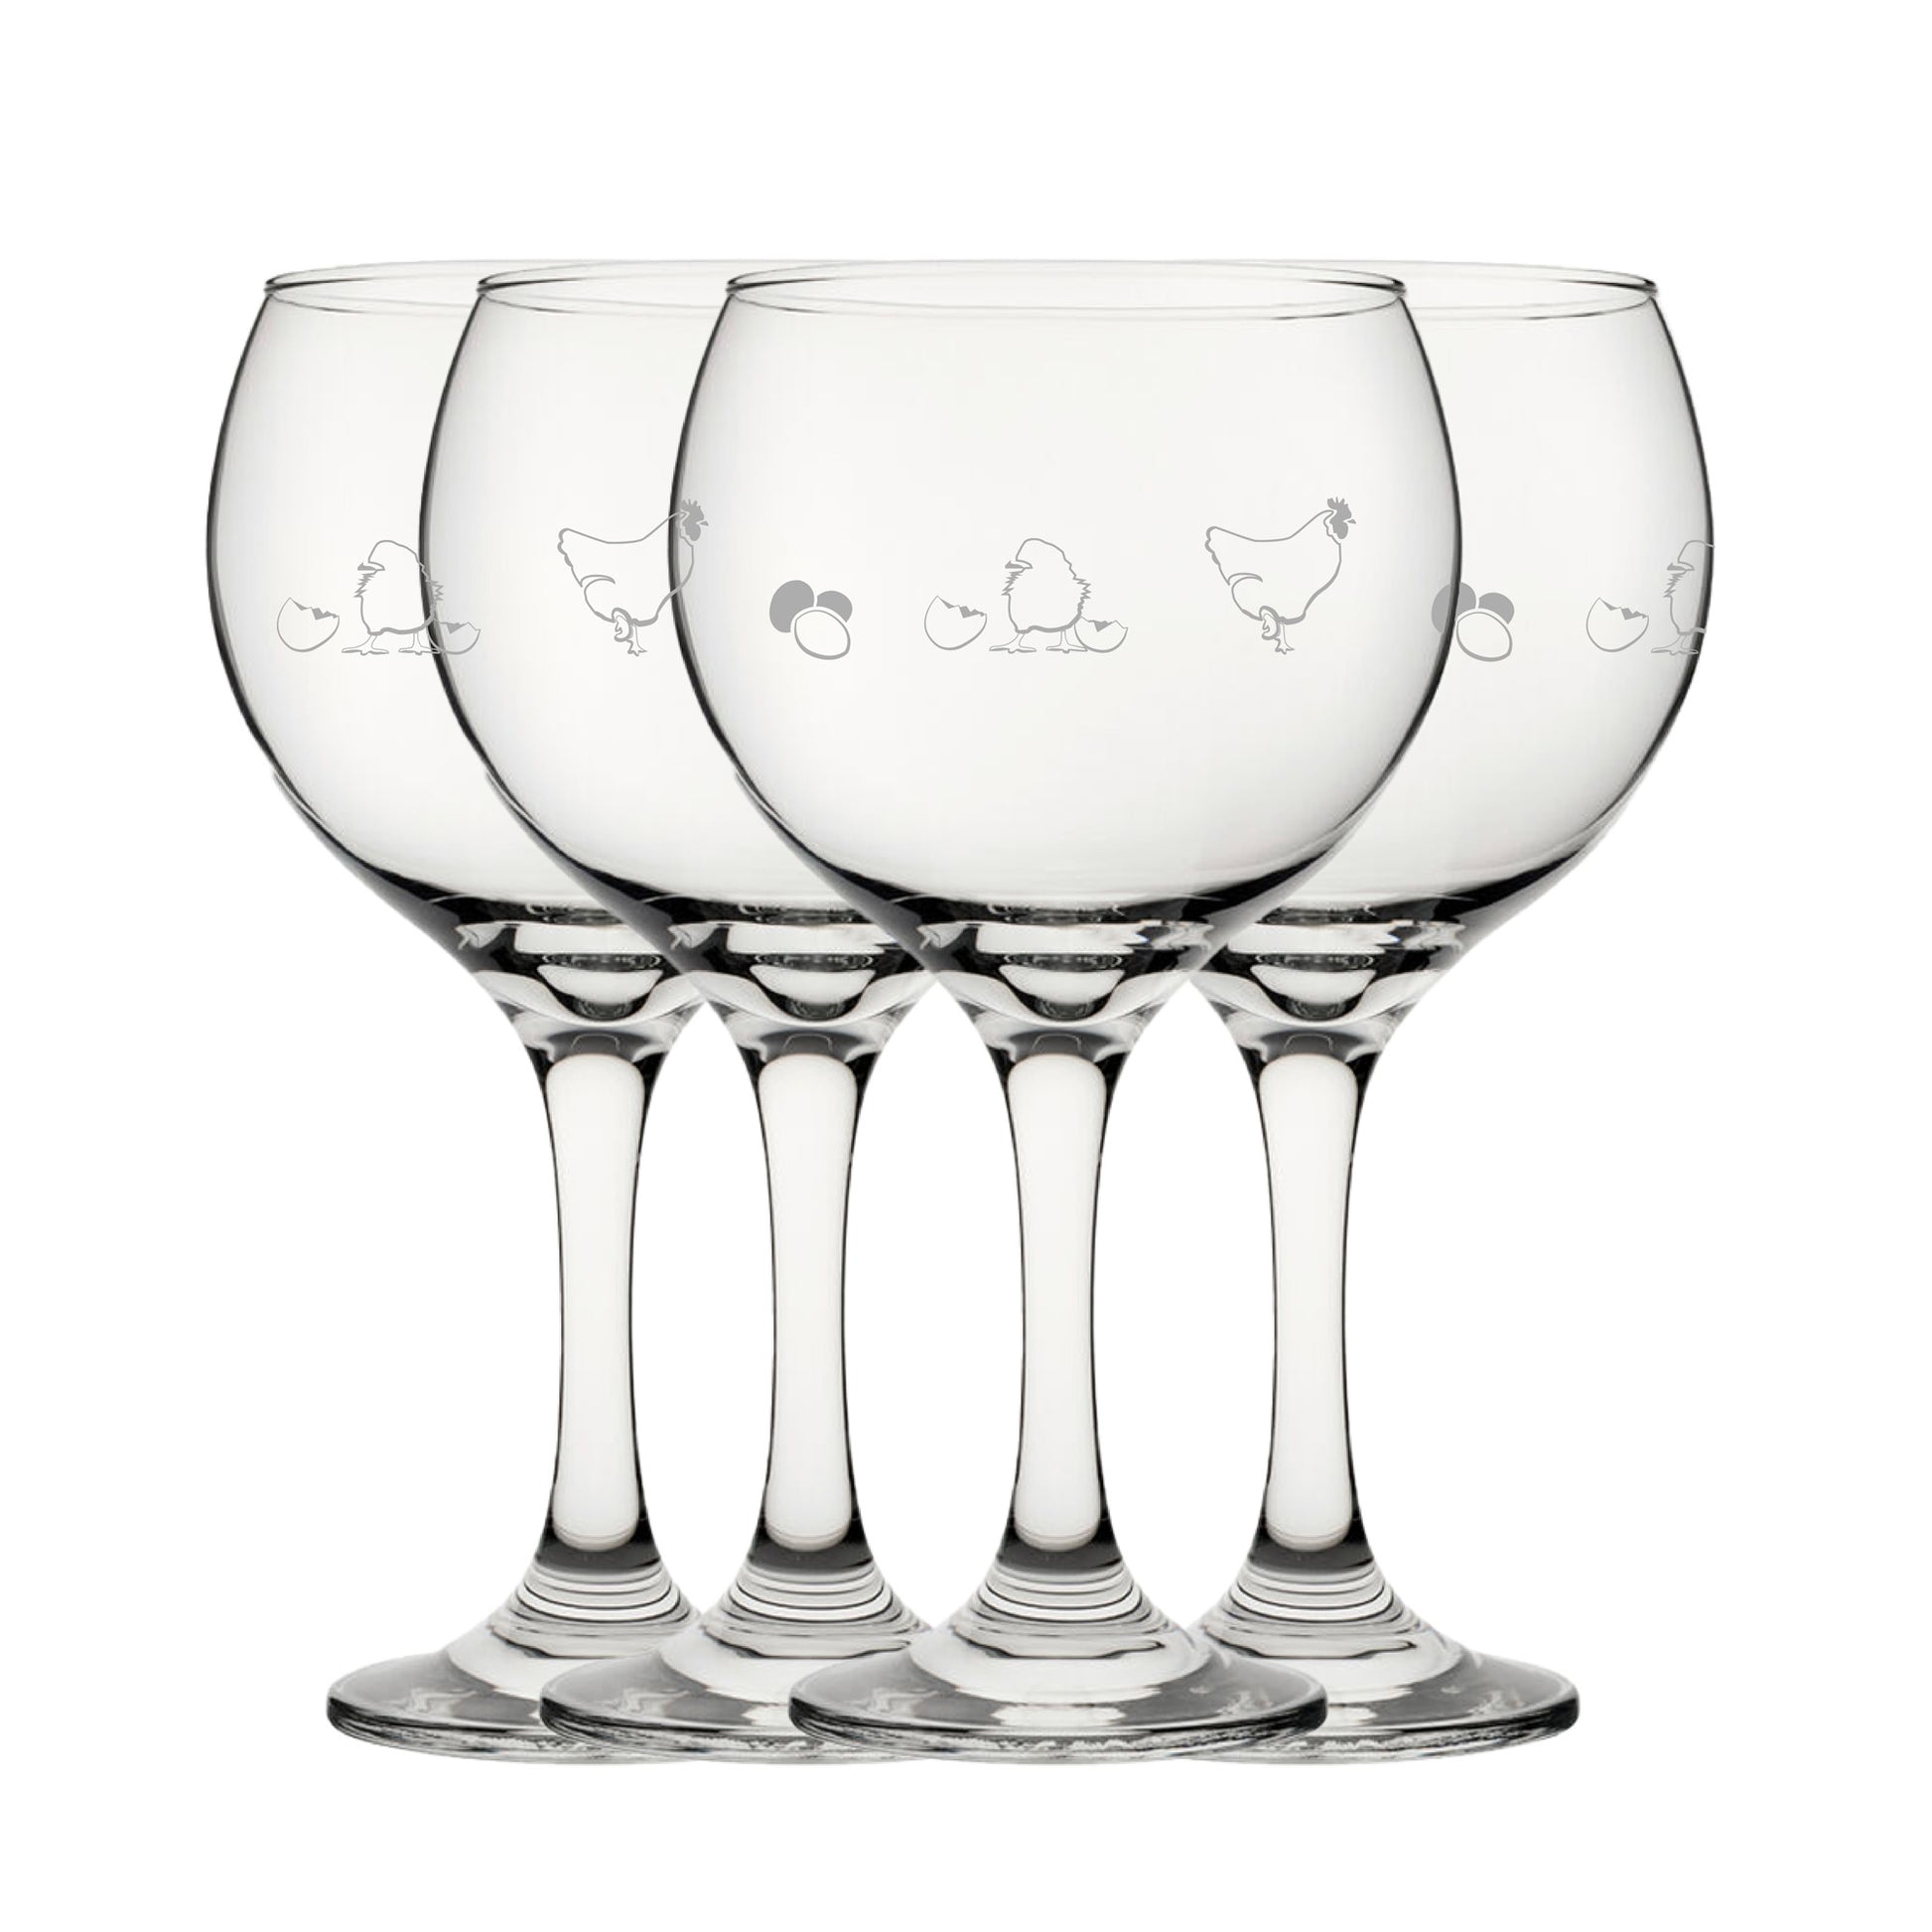 Engraved Chicken Pattern Gin Balloon Set of 4 22.5oz Glasses Image 2